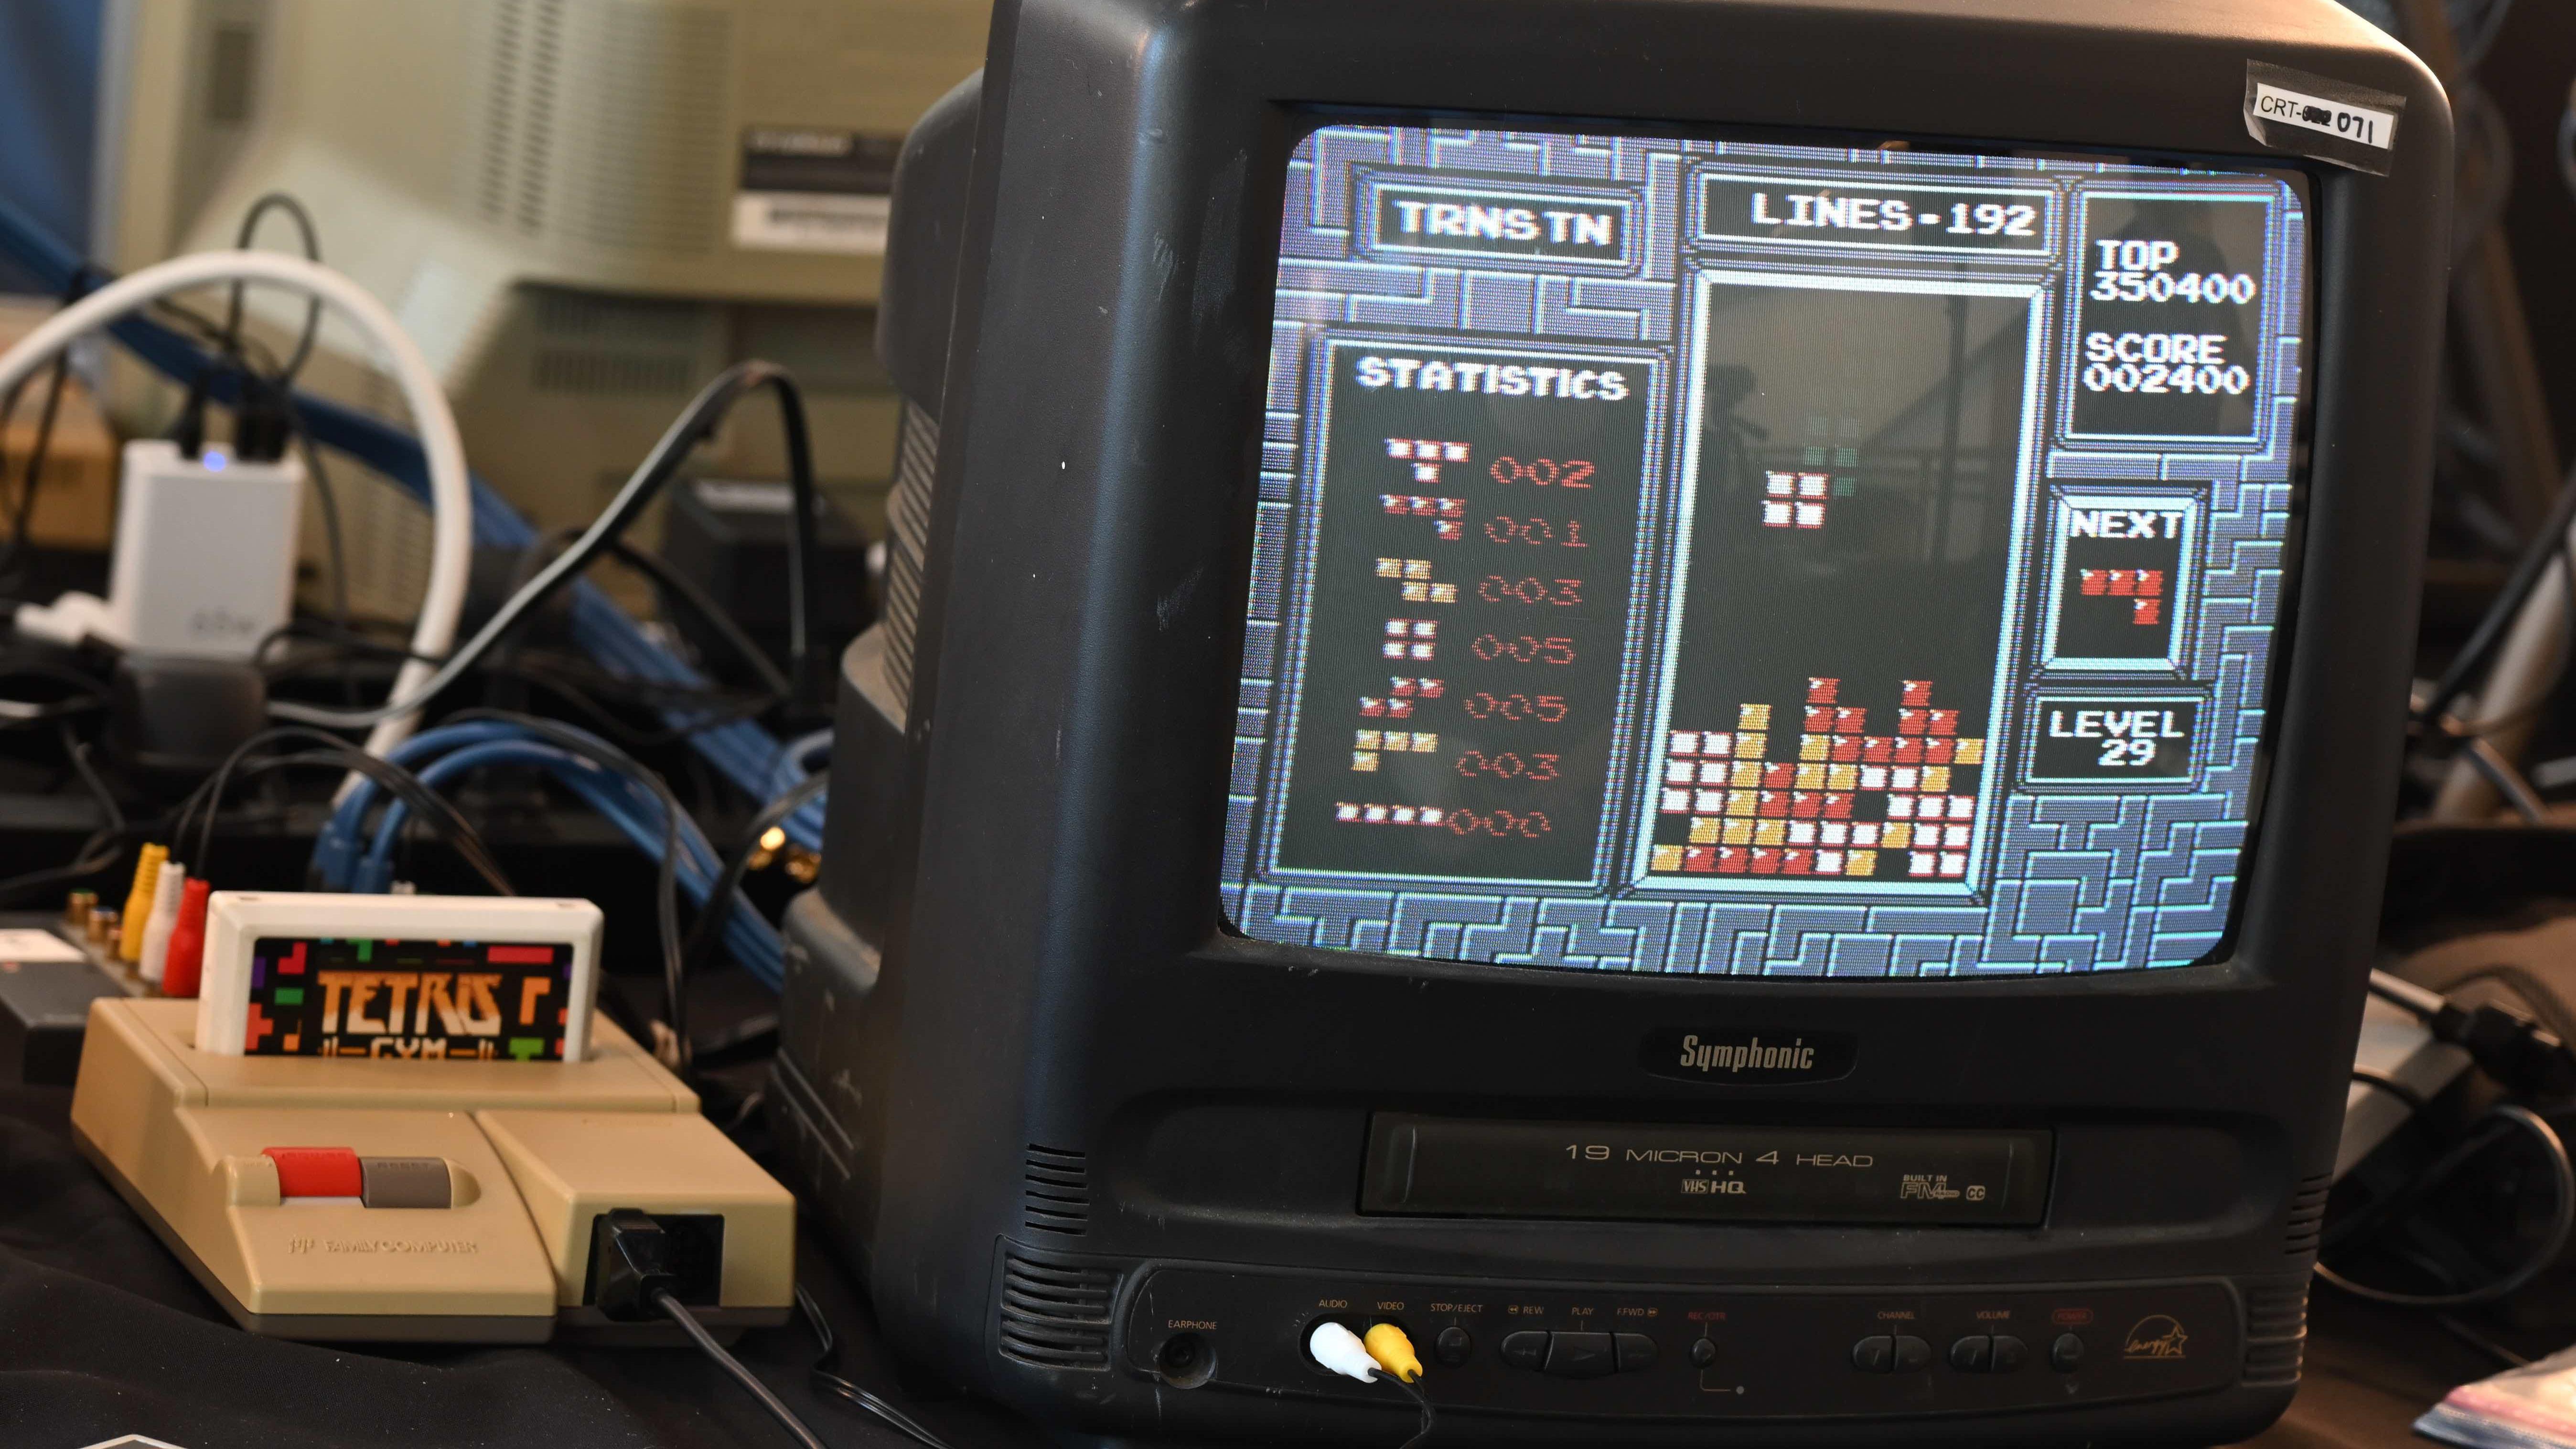 Nintendo gaming console with Tetris cartridge inserted and Tetris on a TV monitor